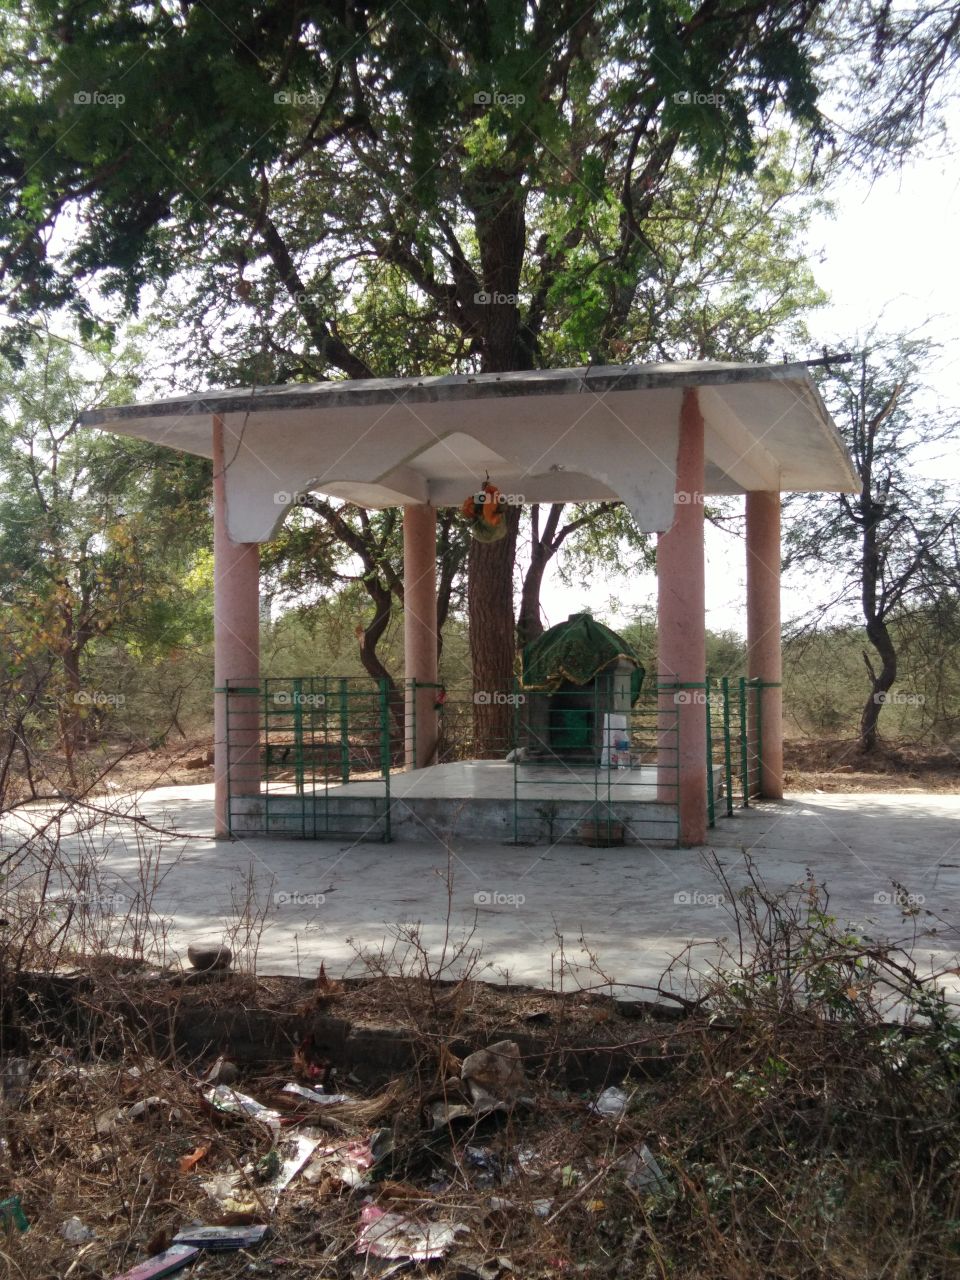 Gabipir. 
there is one open temple in forest.